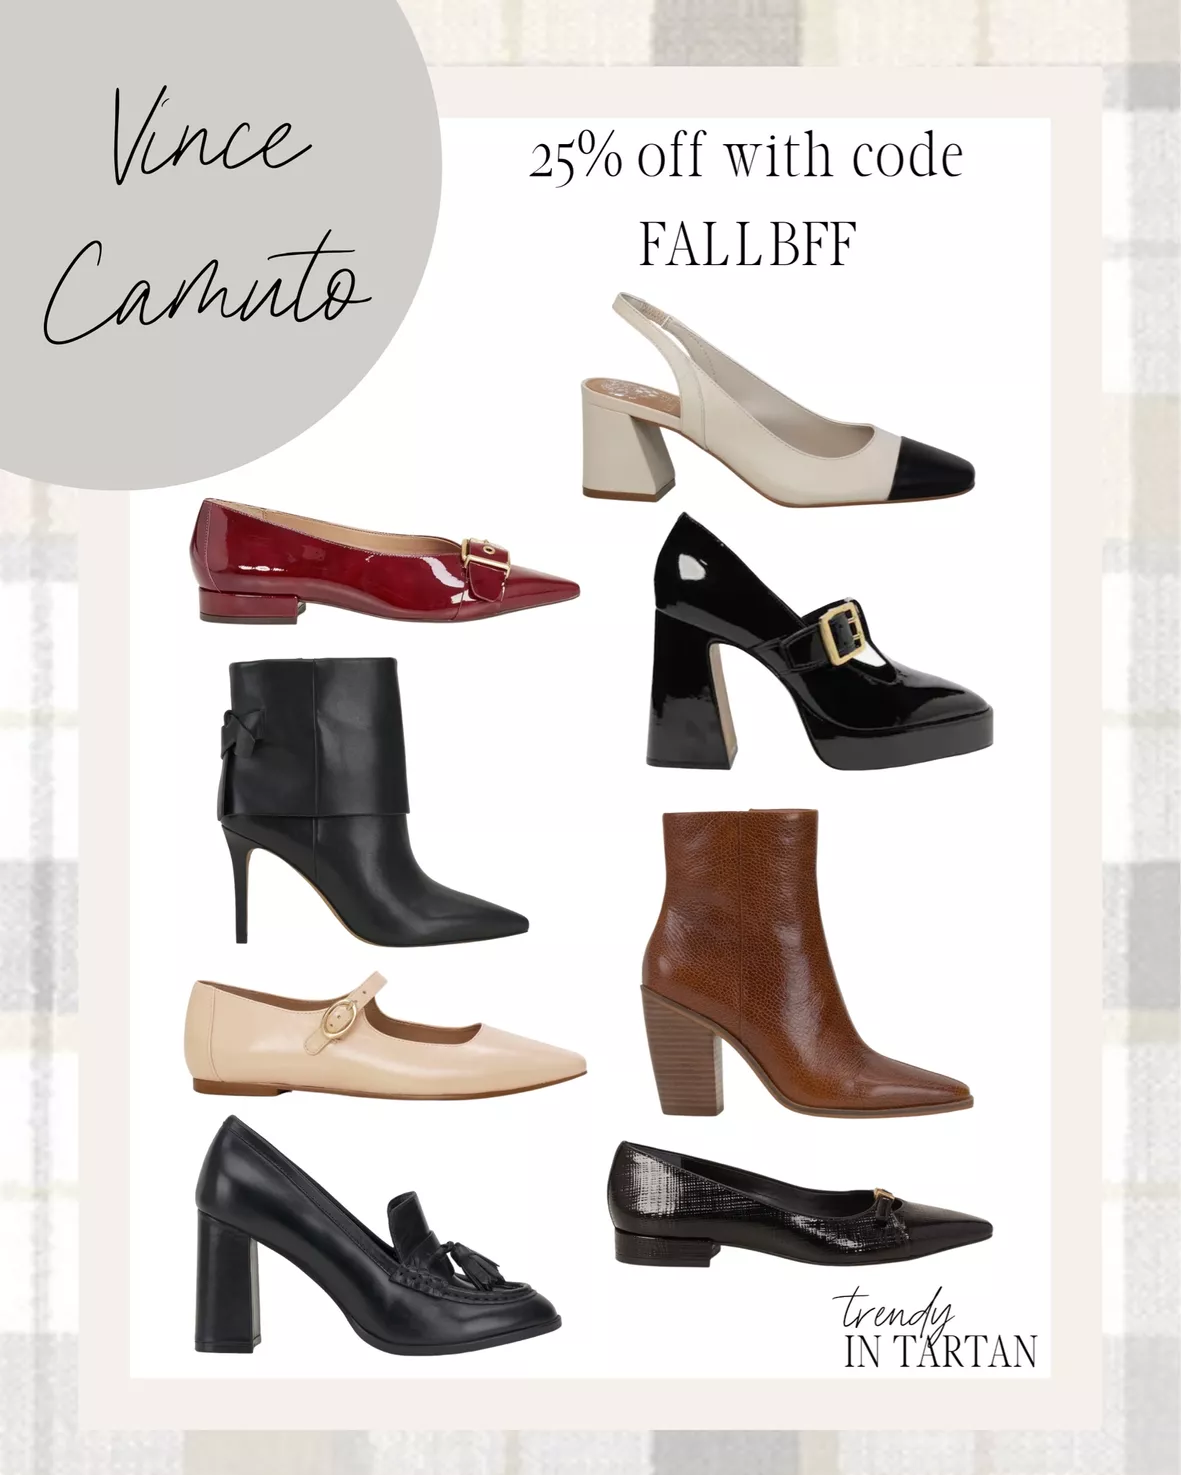 Vince Camuto Shoes For Women